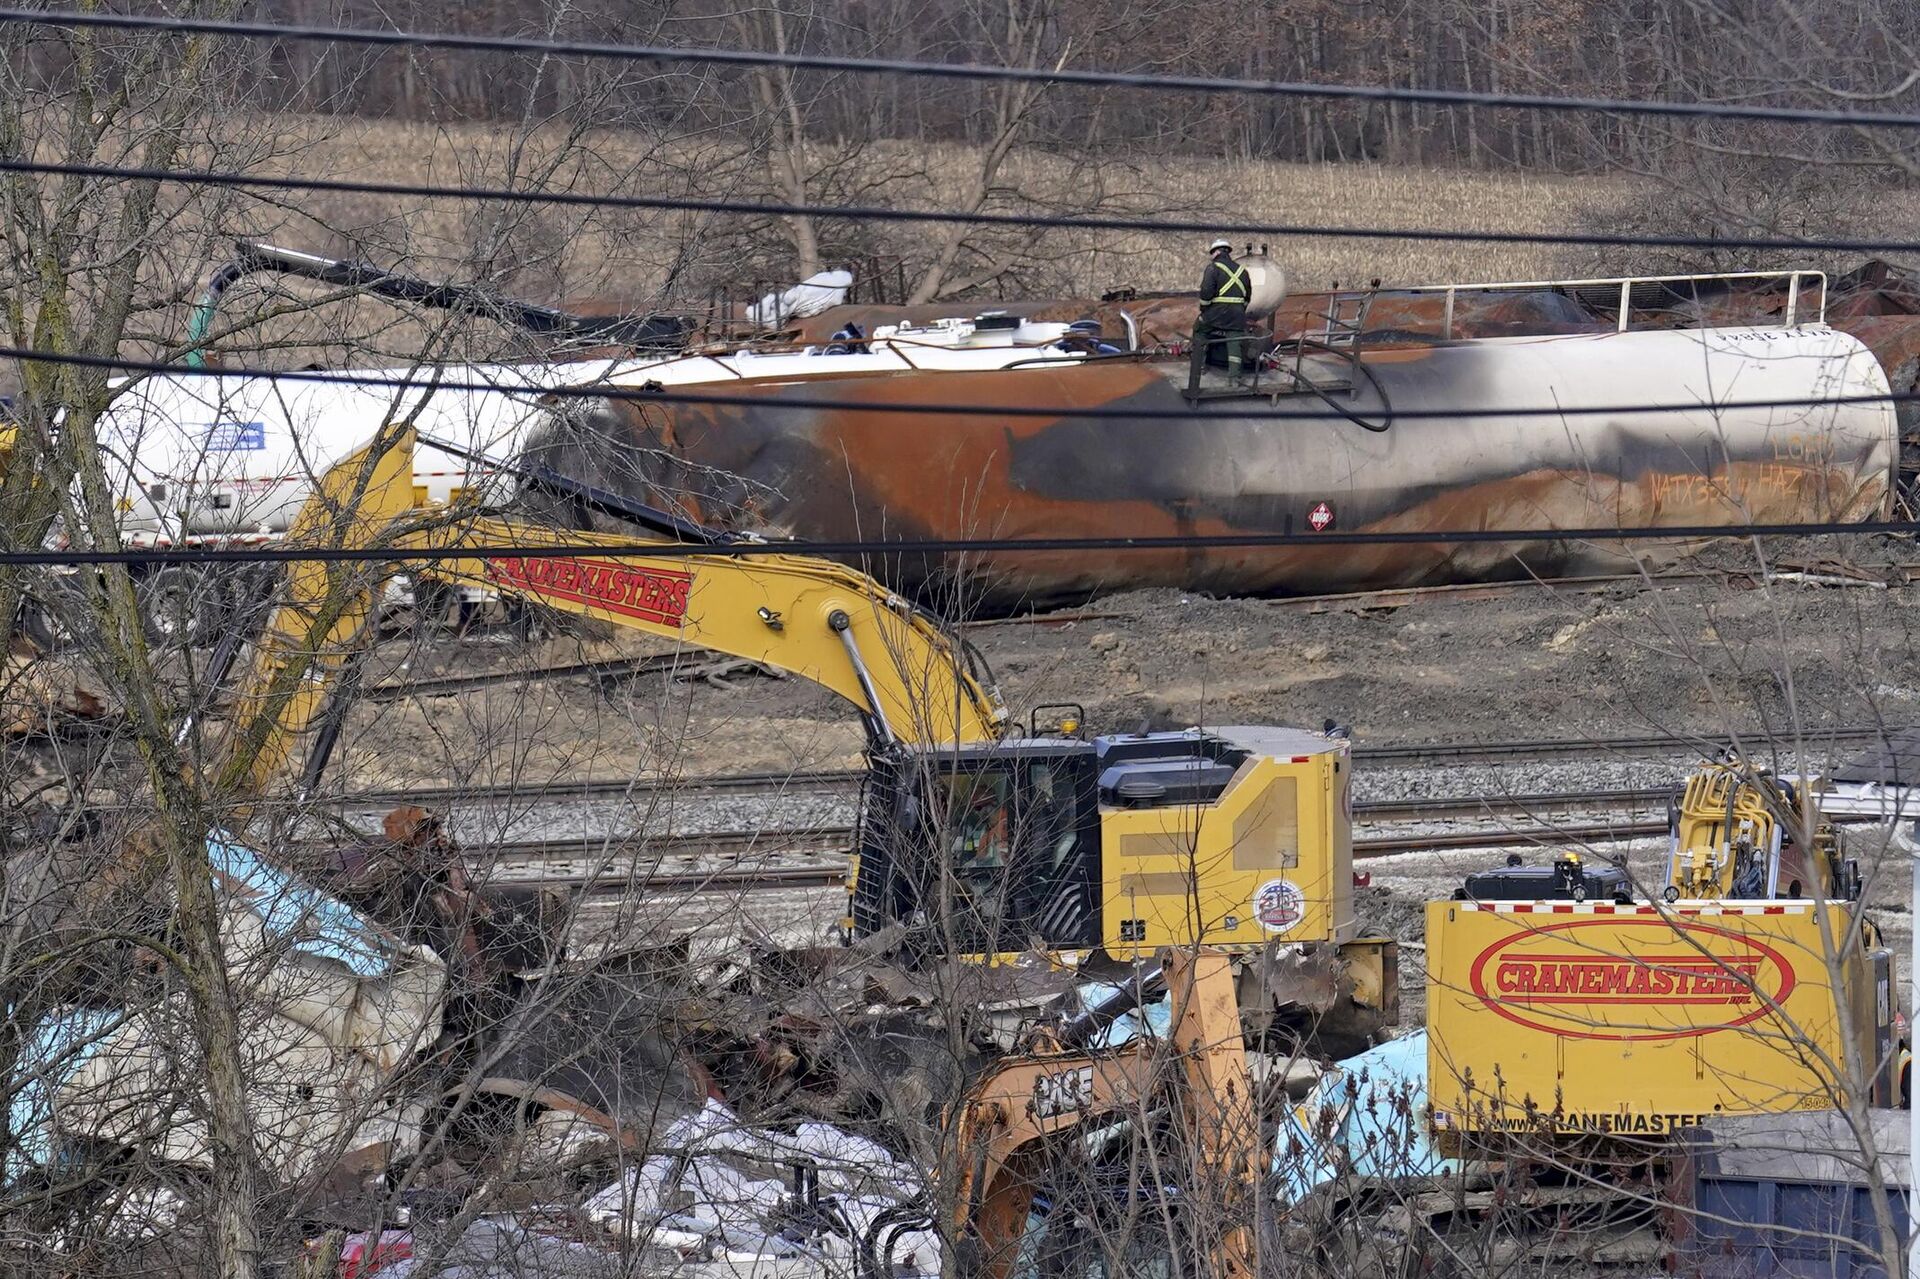 Workers continue to clean up remaining tank cars, Tuesday, Feb. 21, 2023, in East Palestine, Ohio, following the Feb. 3 Norfolk Southern freight train derailment. - Sputnik International, 1920, 24.02.2023